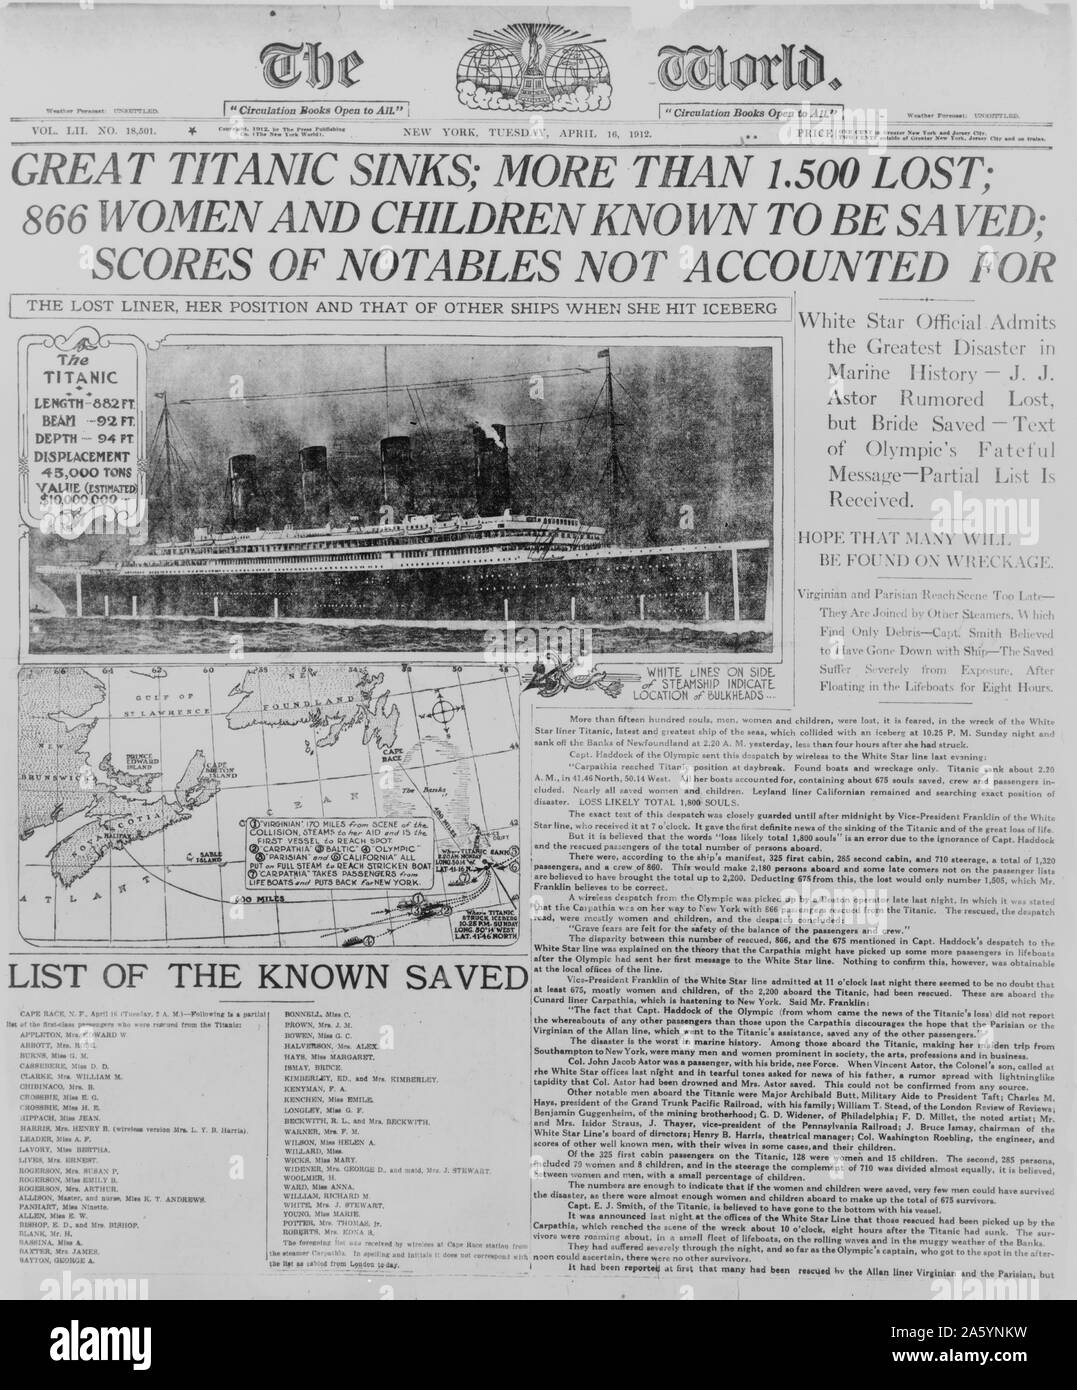 Photograph of front page of The world 16 April 1912 headlining the sinking of the Titanic Stock Photo